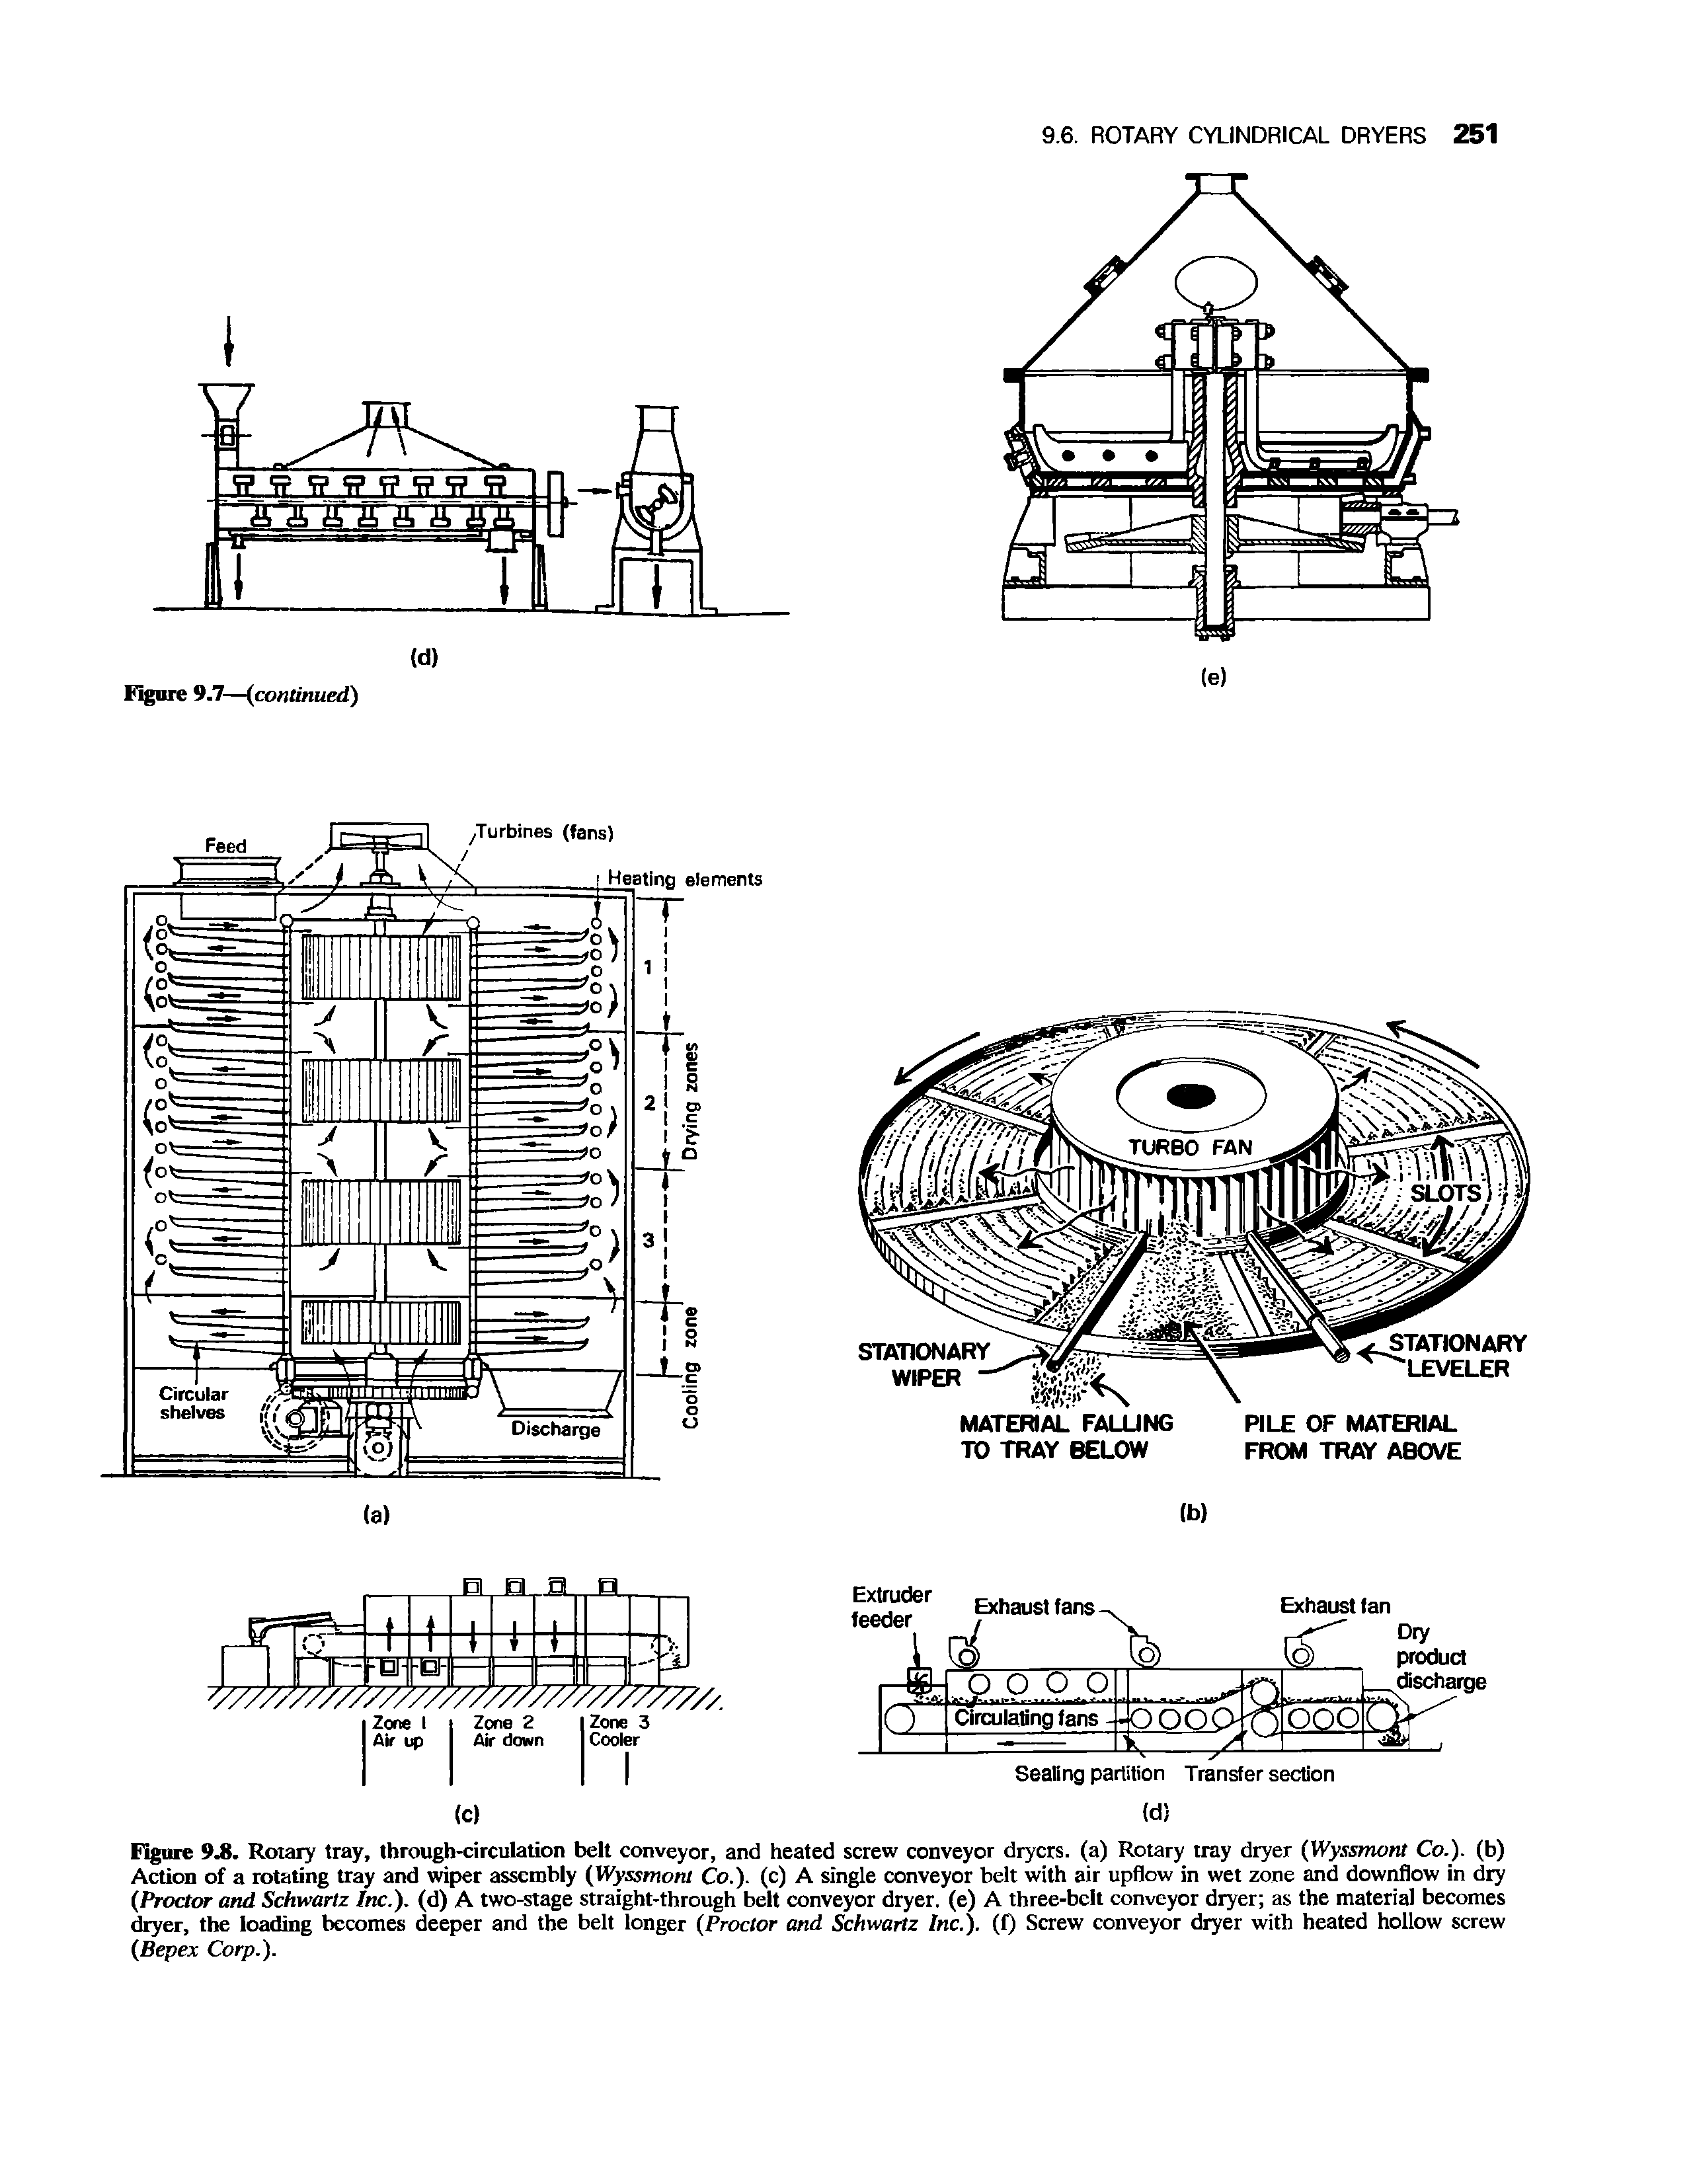 Figure 9.8. Rotary tray, through-circulation belt conveyor, and heated screw conveyor dryers, (a) Rotary tray dryer (Wyssmont Co.), (b) Action of a rotating tray and wiper assembly (Wyssmont Co.), (c) A single conveyor belt with air upflow in wet zone and downflow in dry (Proctor and Schwartz Inc.), (d) A two-stage straight-through belt conveyor dryer, (e) A three-belt conveyor dryer as the material becomes dryer, the loading becomes deeper and the belt longer (Proctor and Schwartz Inc.), (f) Screw conveyor dryer with heated hollow screw (Bepex Corp.).